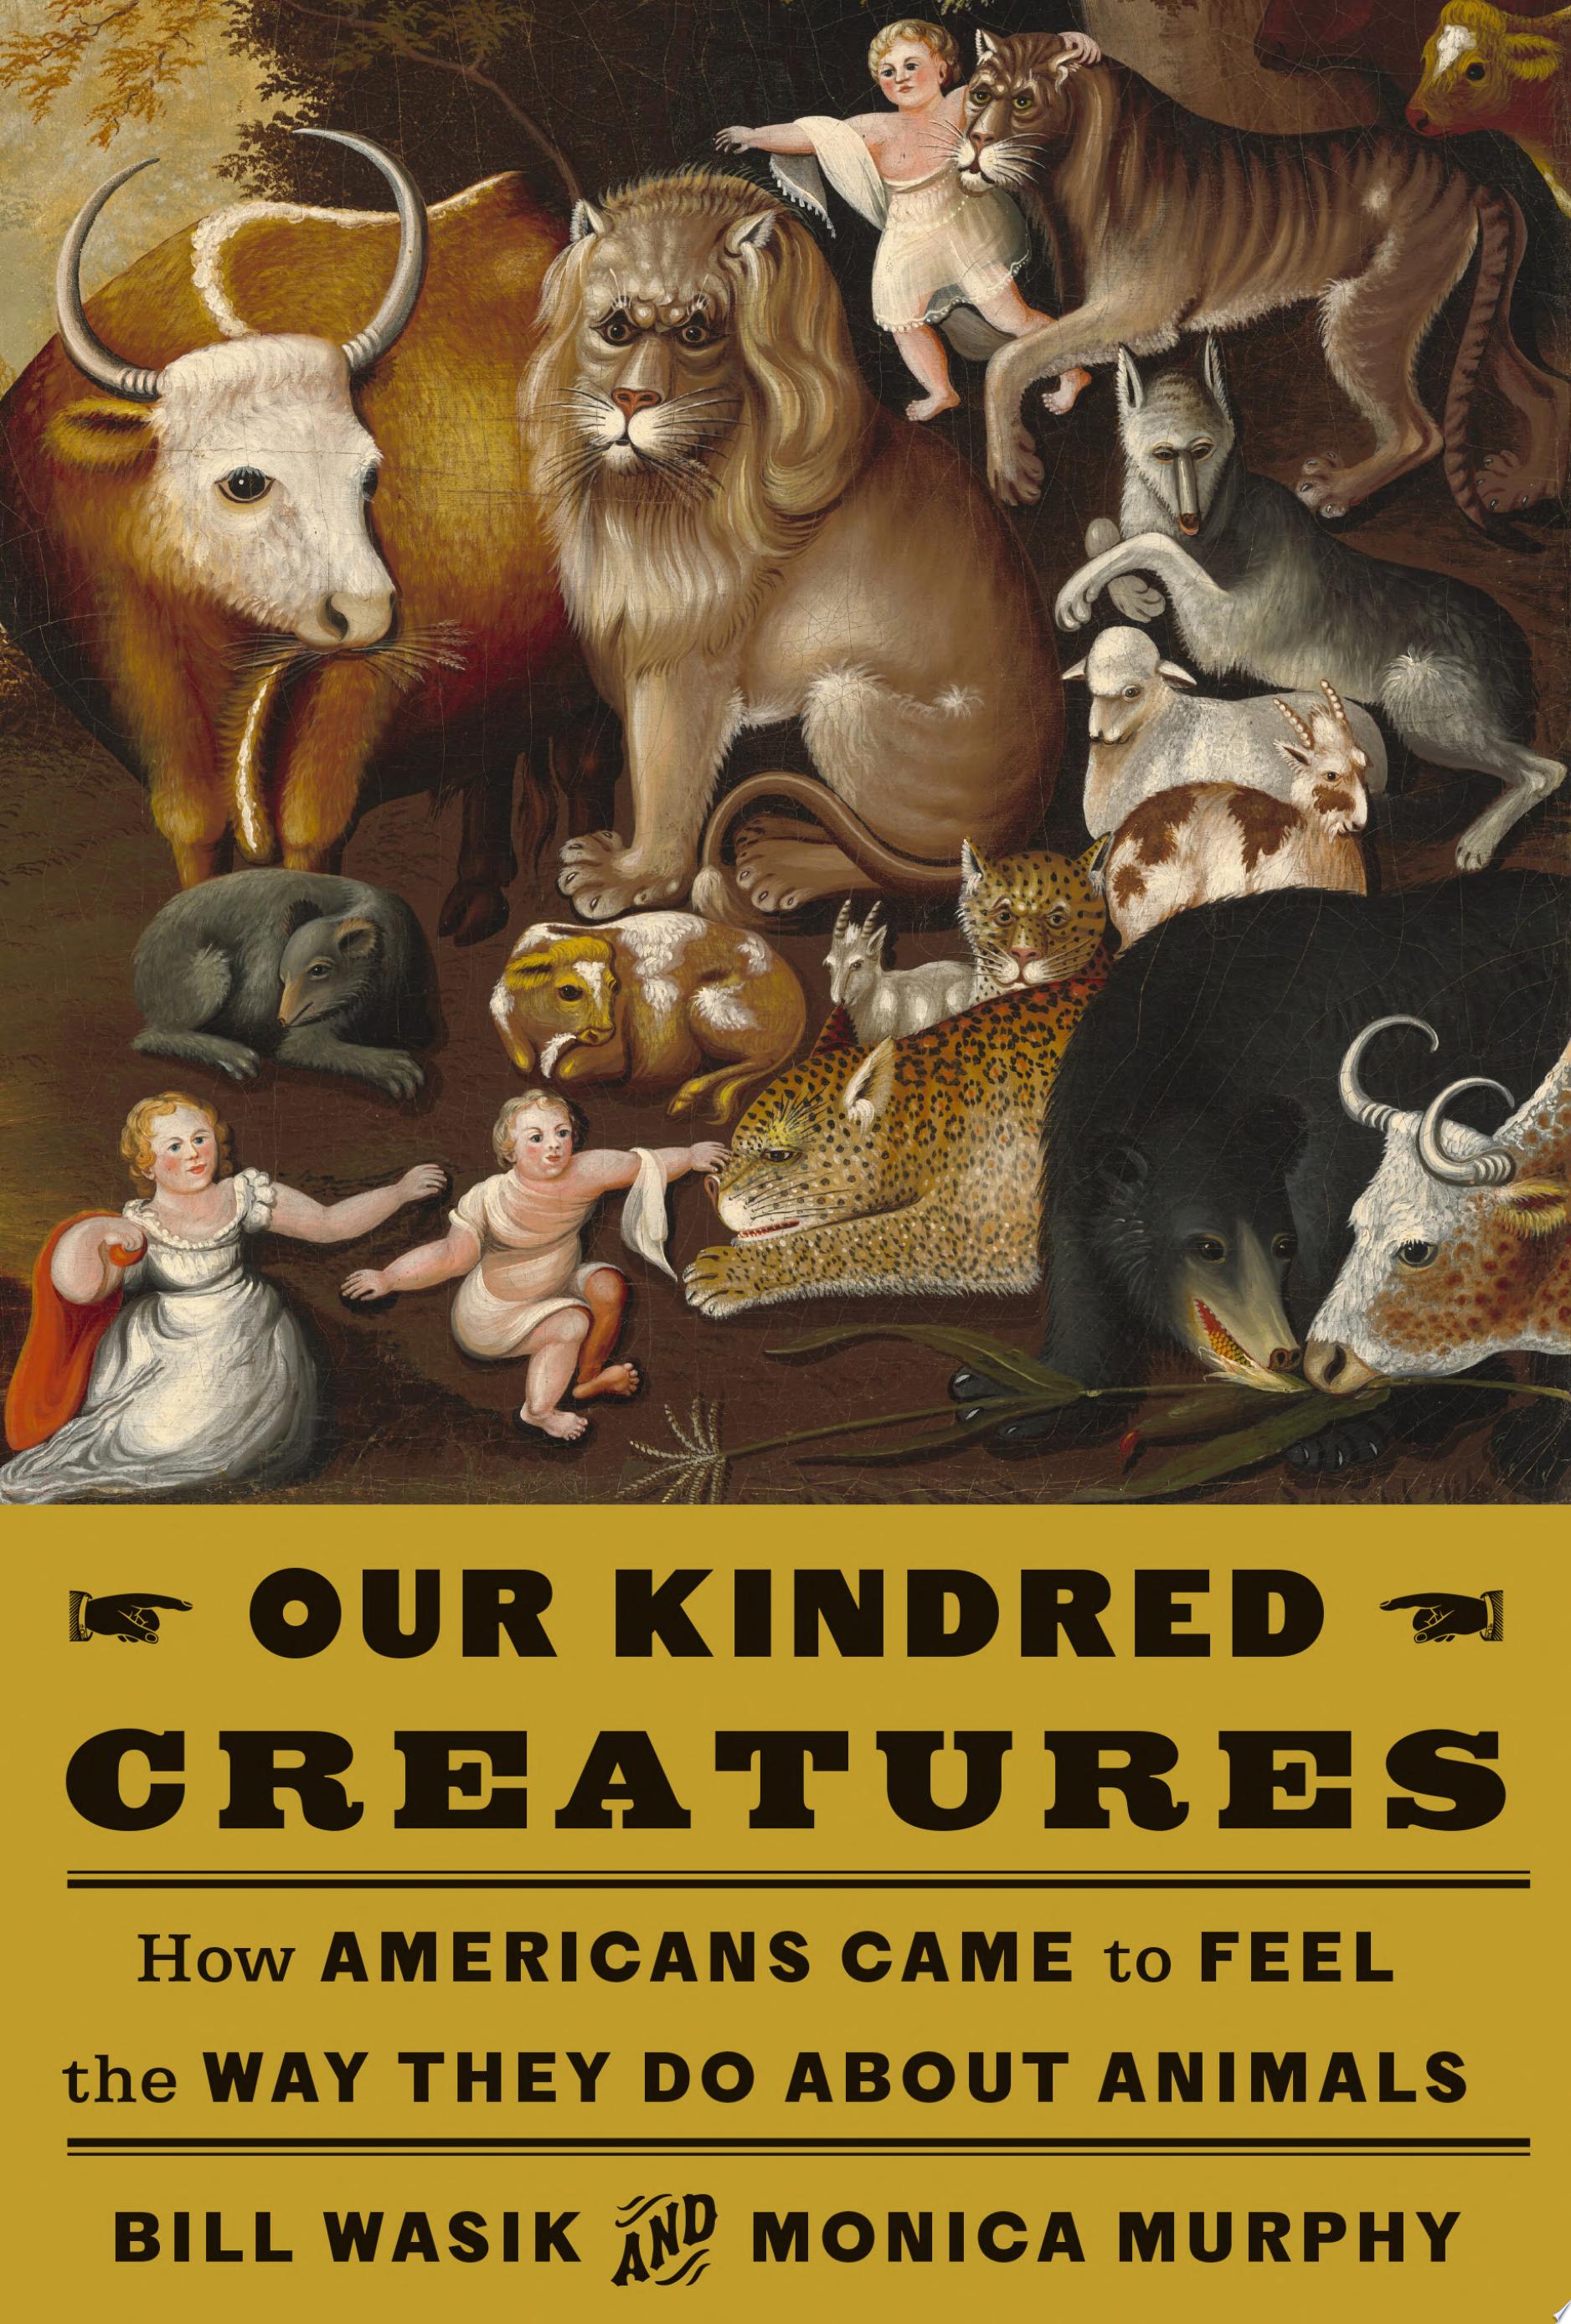 Image for "Our Kindred Creatures"